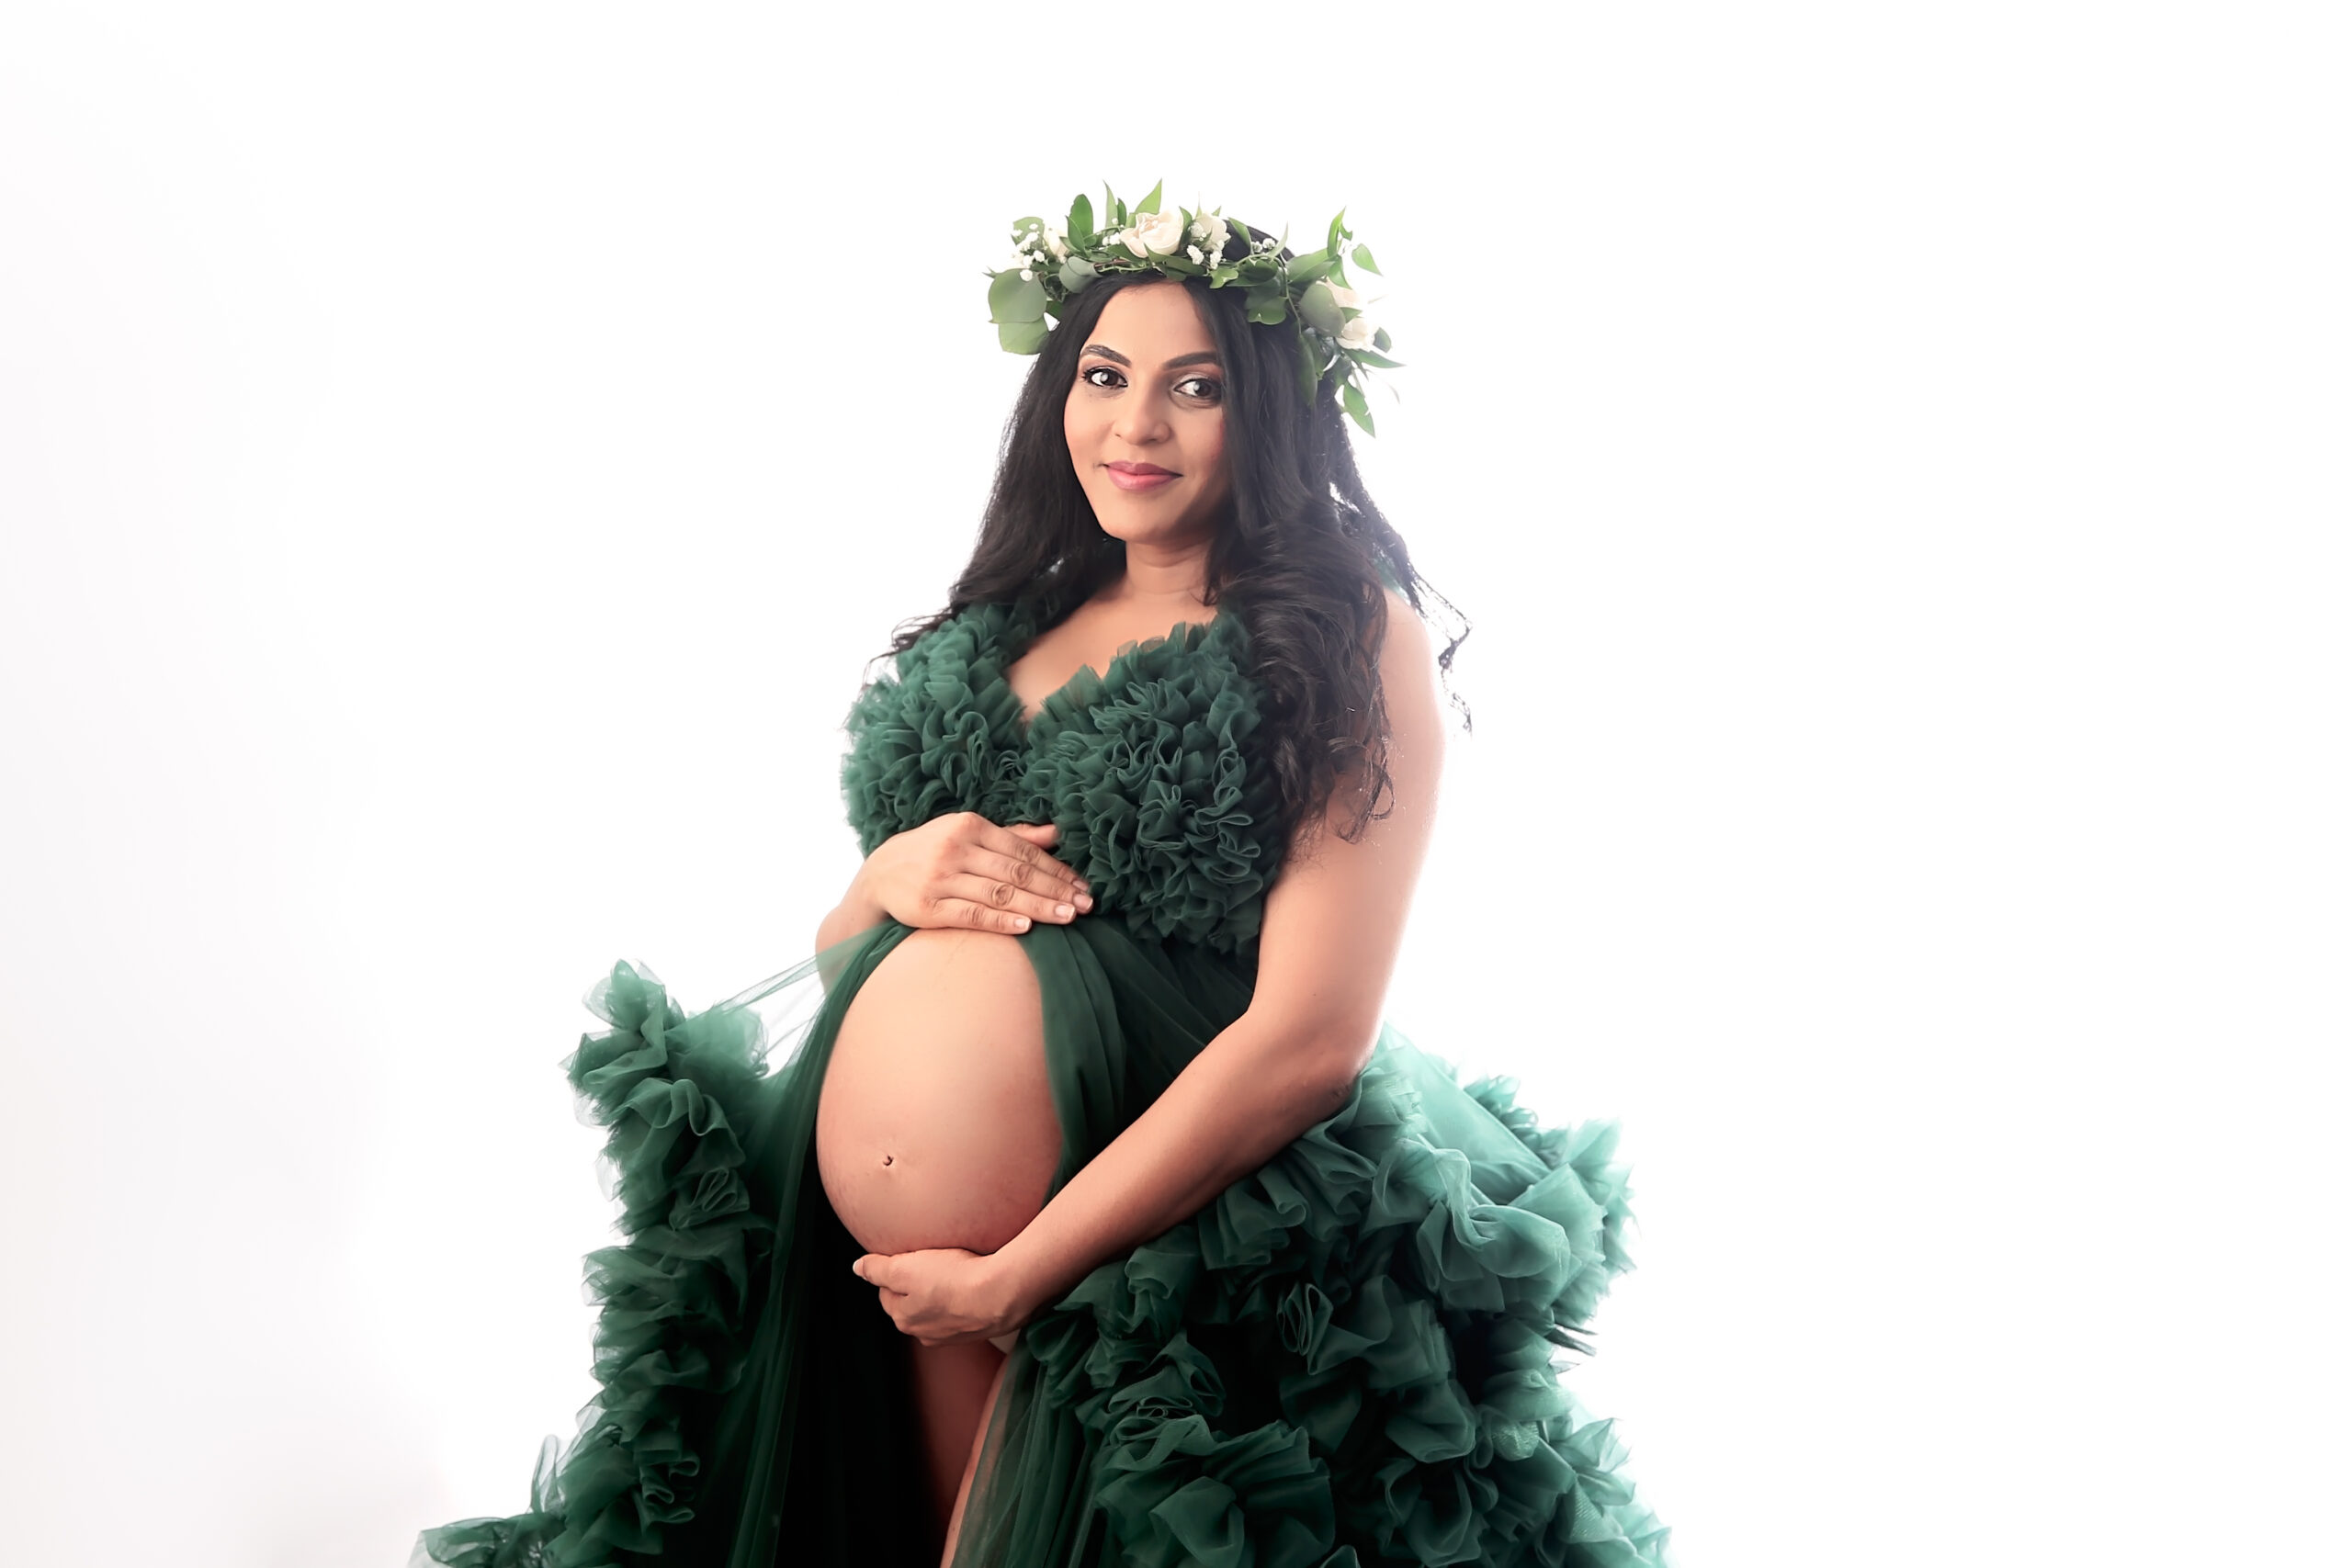 Pregnant woman with floral crown and black hair wearing a green maternity gown